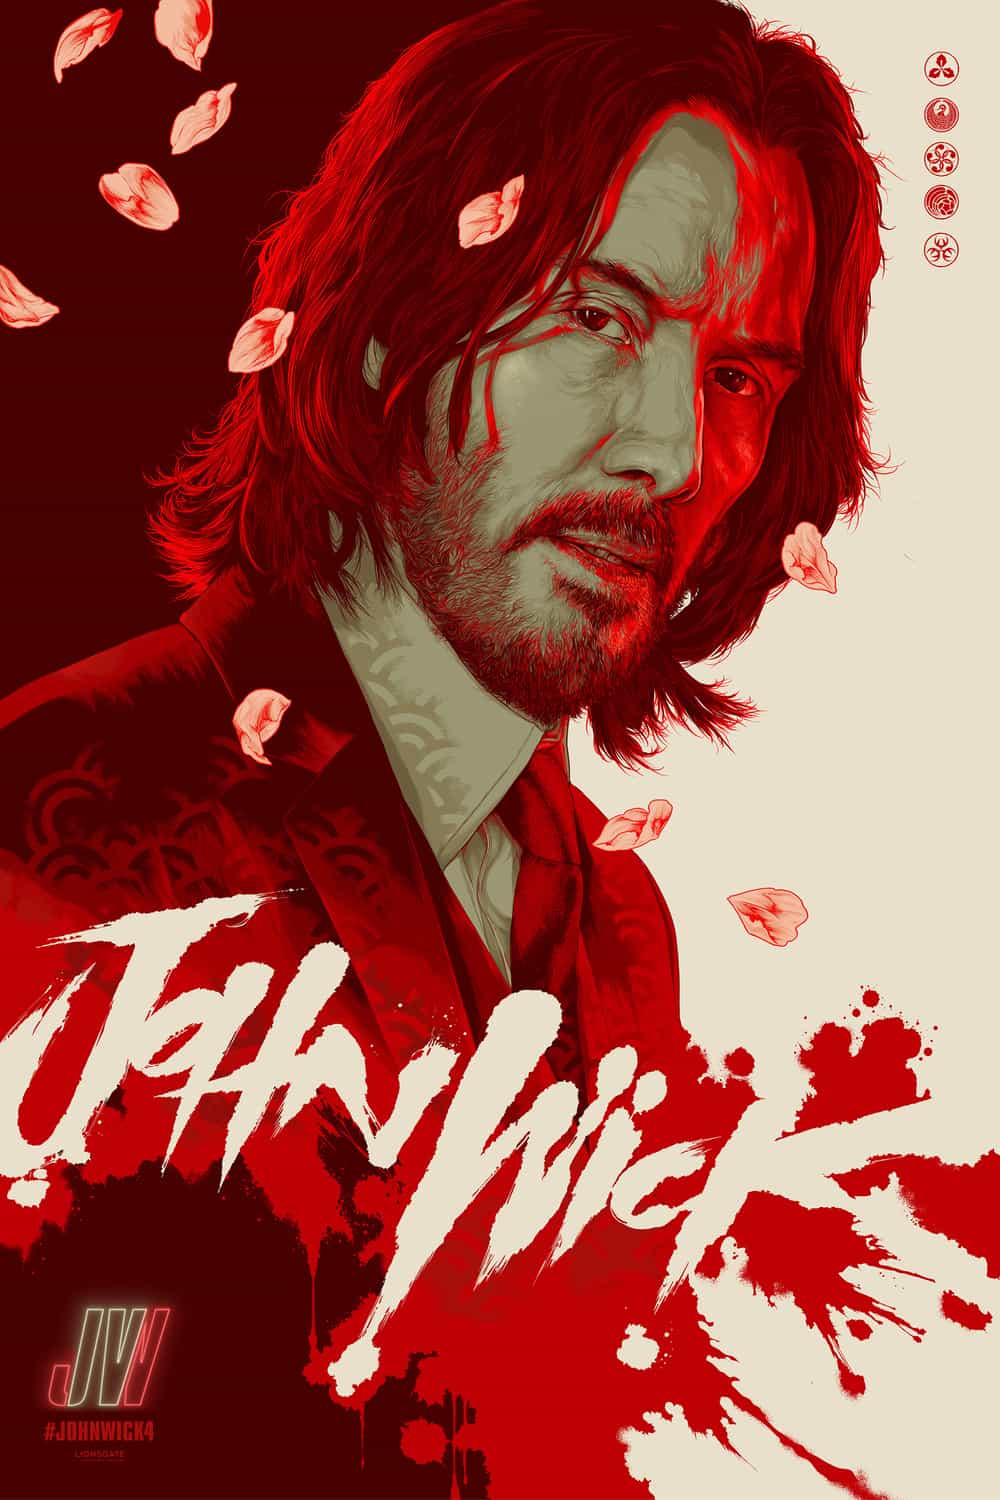 First trailer and teaser poster released for John Wick Chapter 4 starring Keanu Reeves - movie UK release date 24th March 2023 #johnwickchapter4